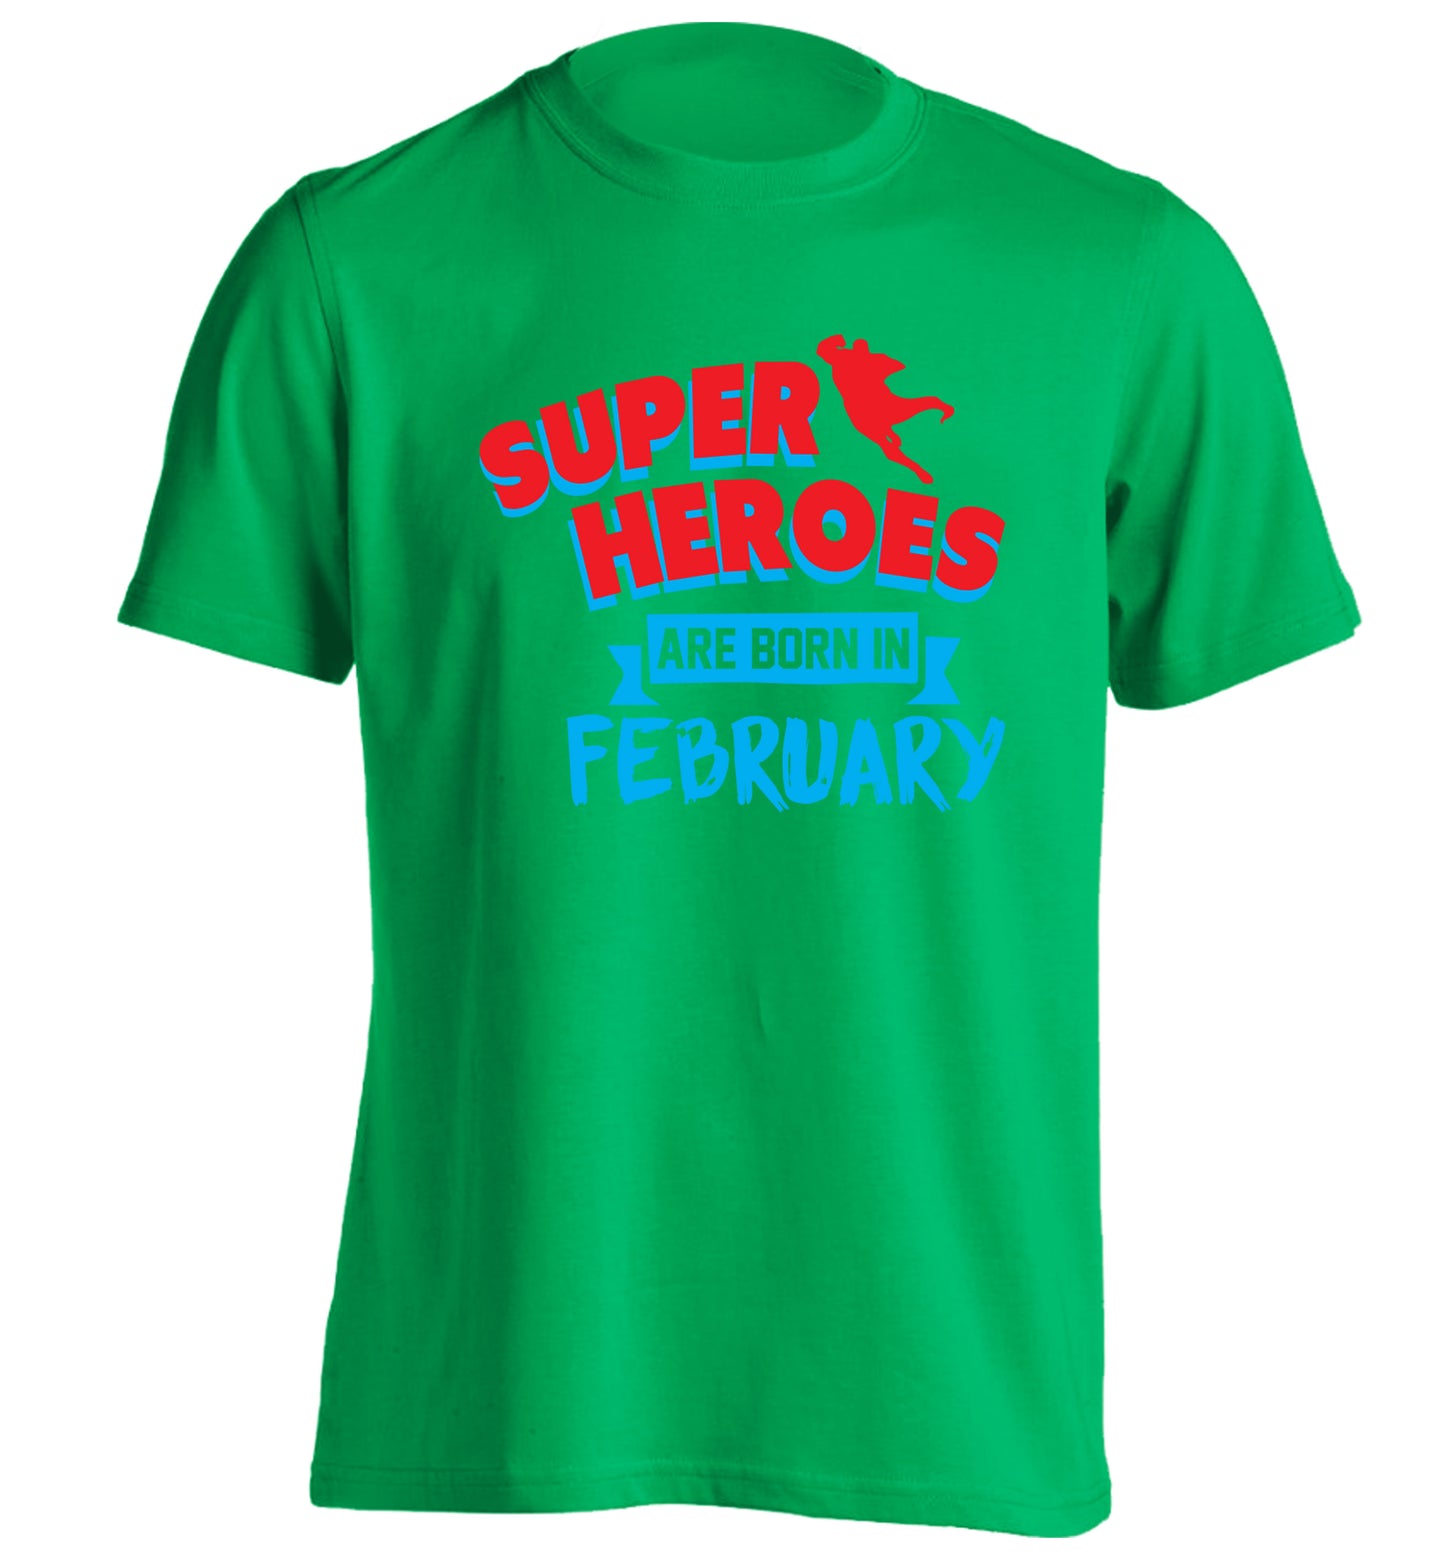 superheroes are born in February adults unisex green Tshirt 2XL